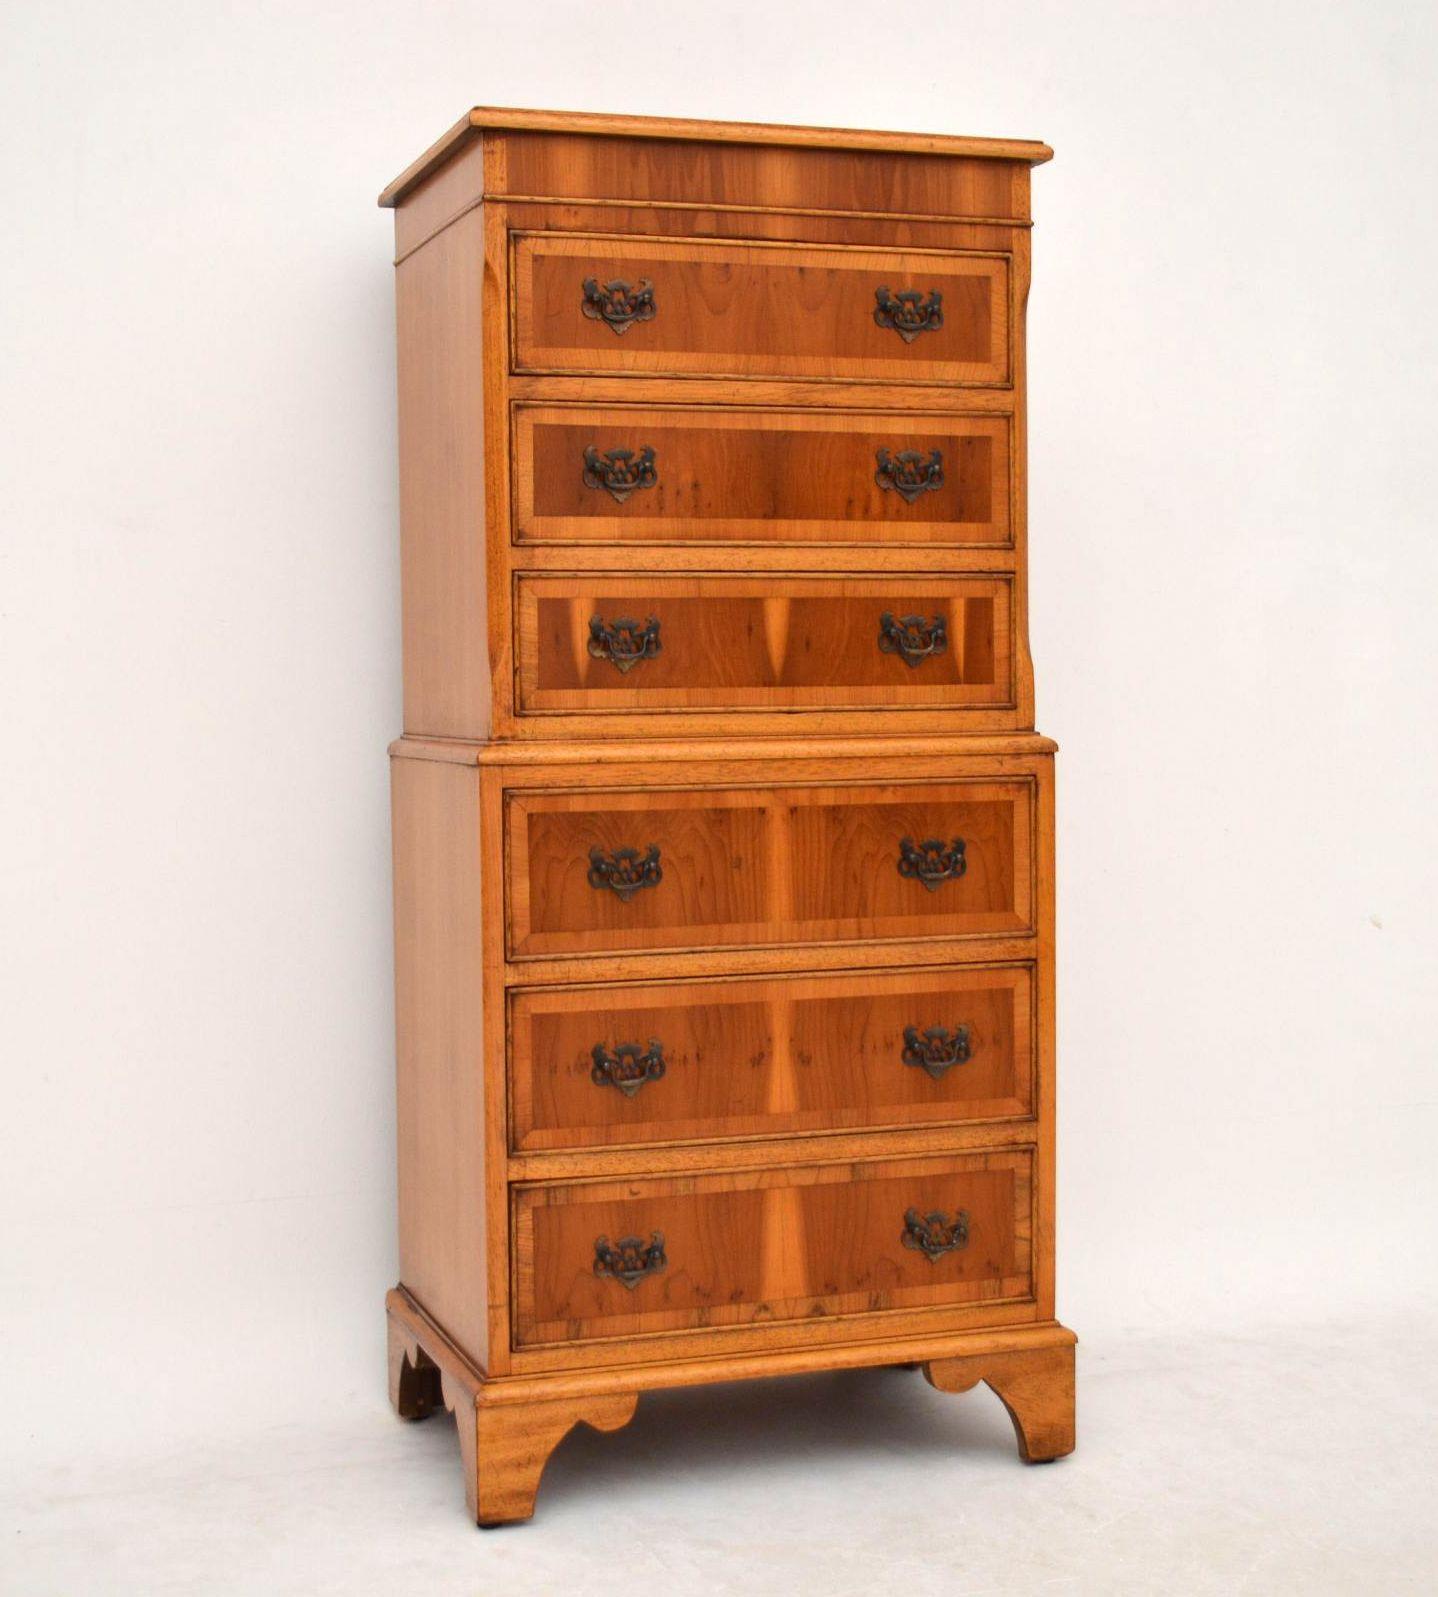 Antique Georgian style yew wood chest on chest in lovely original condition, with a beautiful grain to the wood & it dates to circa 1930s-1950s period. It has a crossbanded top, 6 graduated drawers with original brass handles & sits on bracket feet.